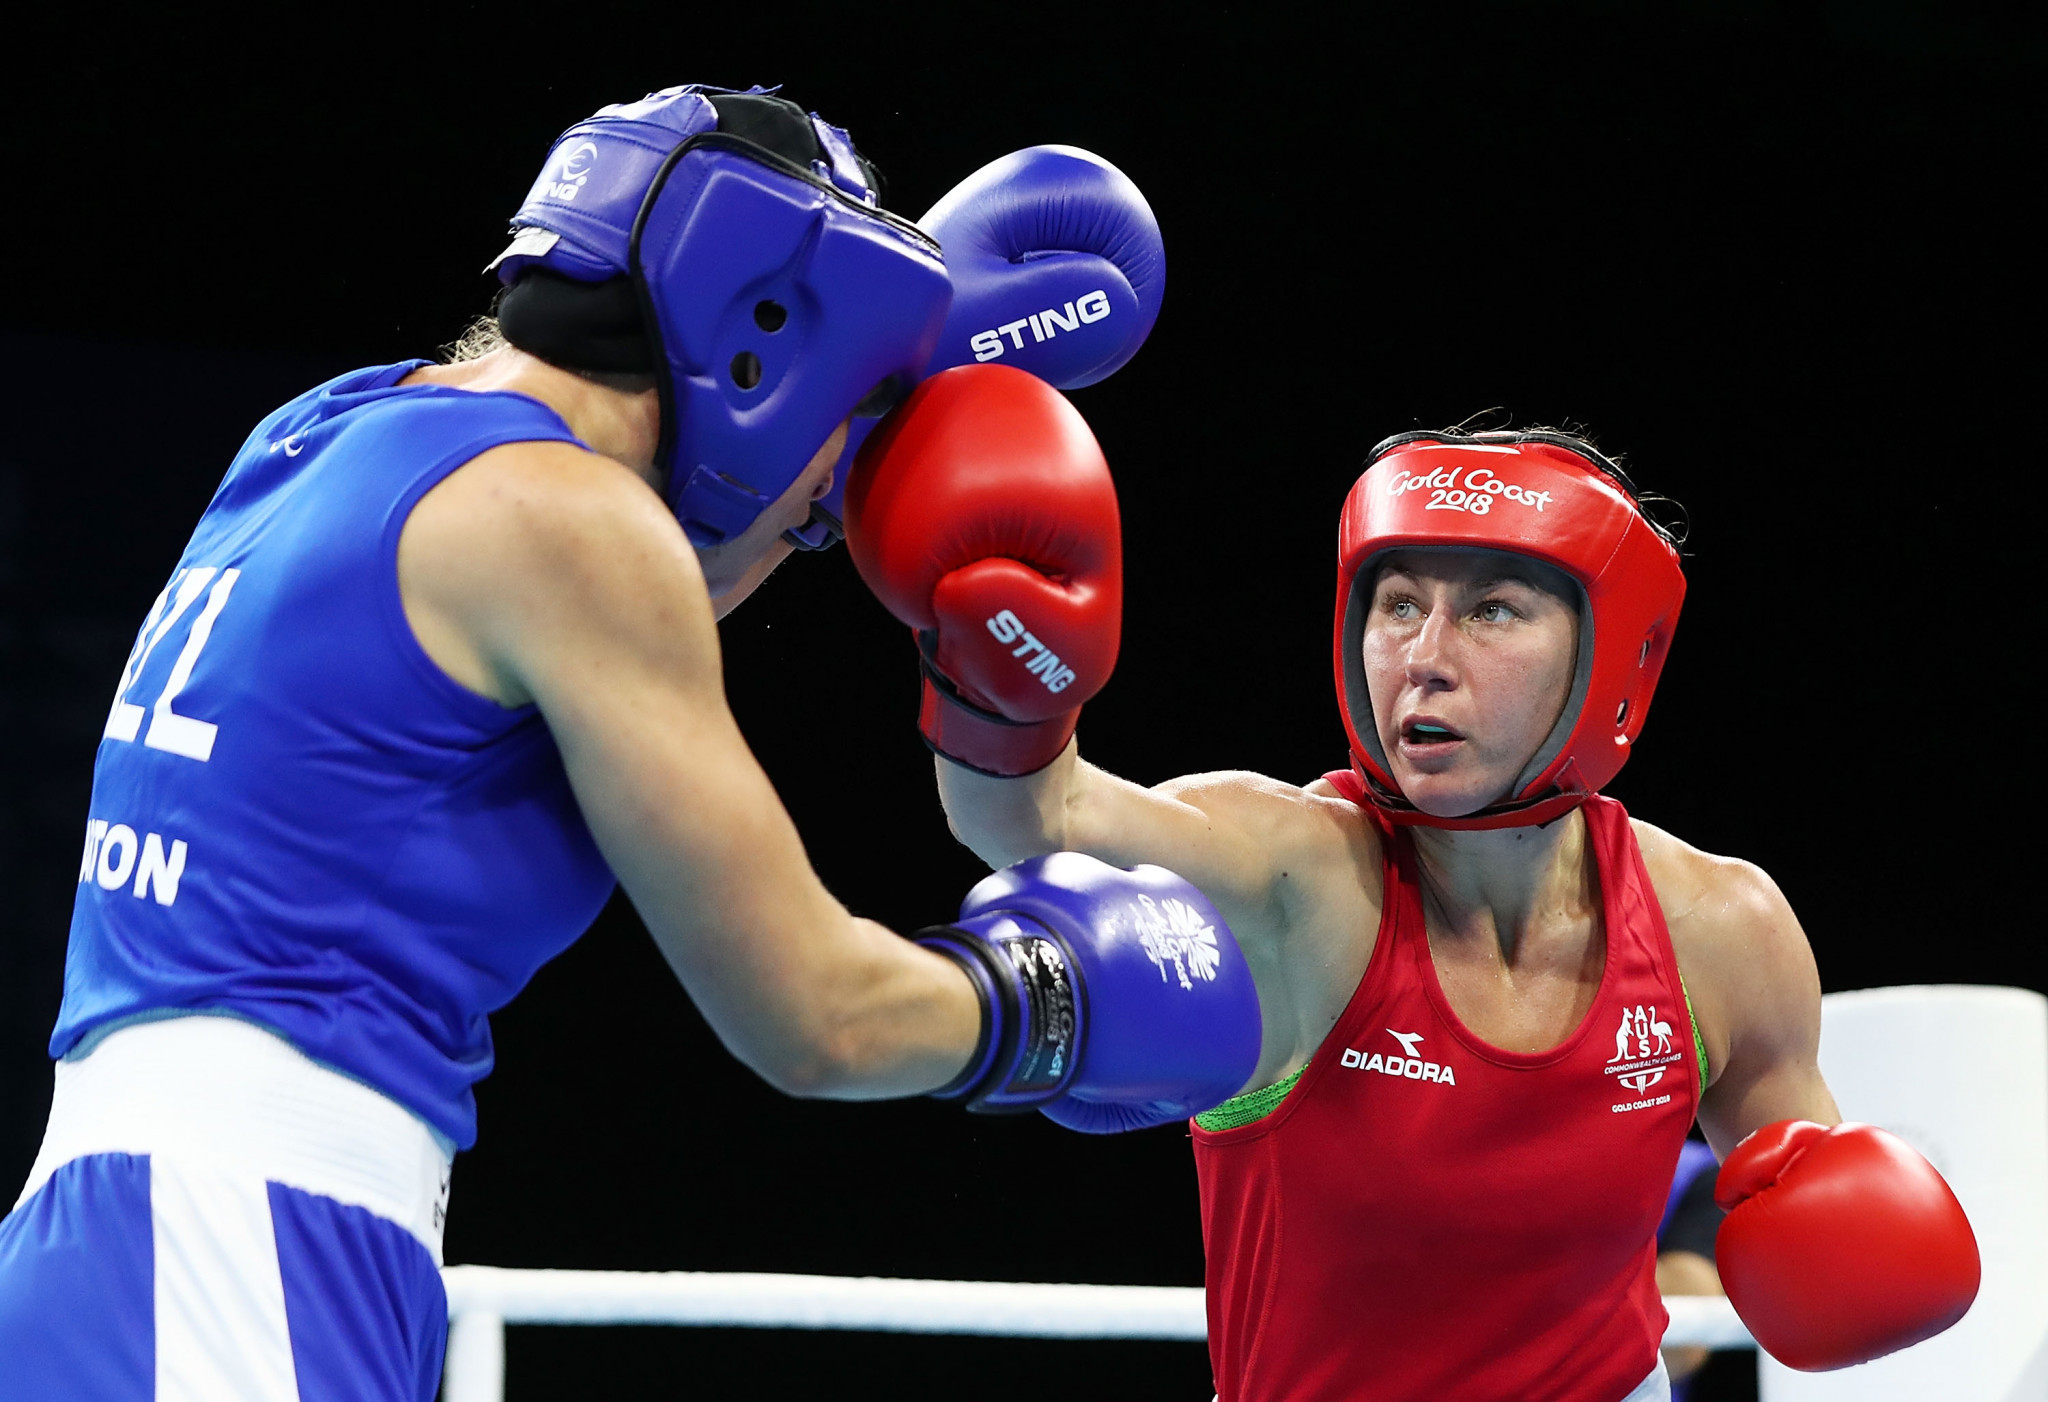 Australia's Commonwealth Games champion Anja Stridsman was beaten by Thailand's Sudaporn Seesondee ©Getty Images